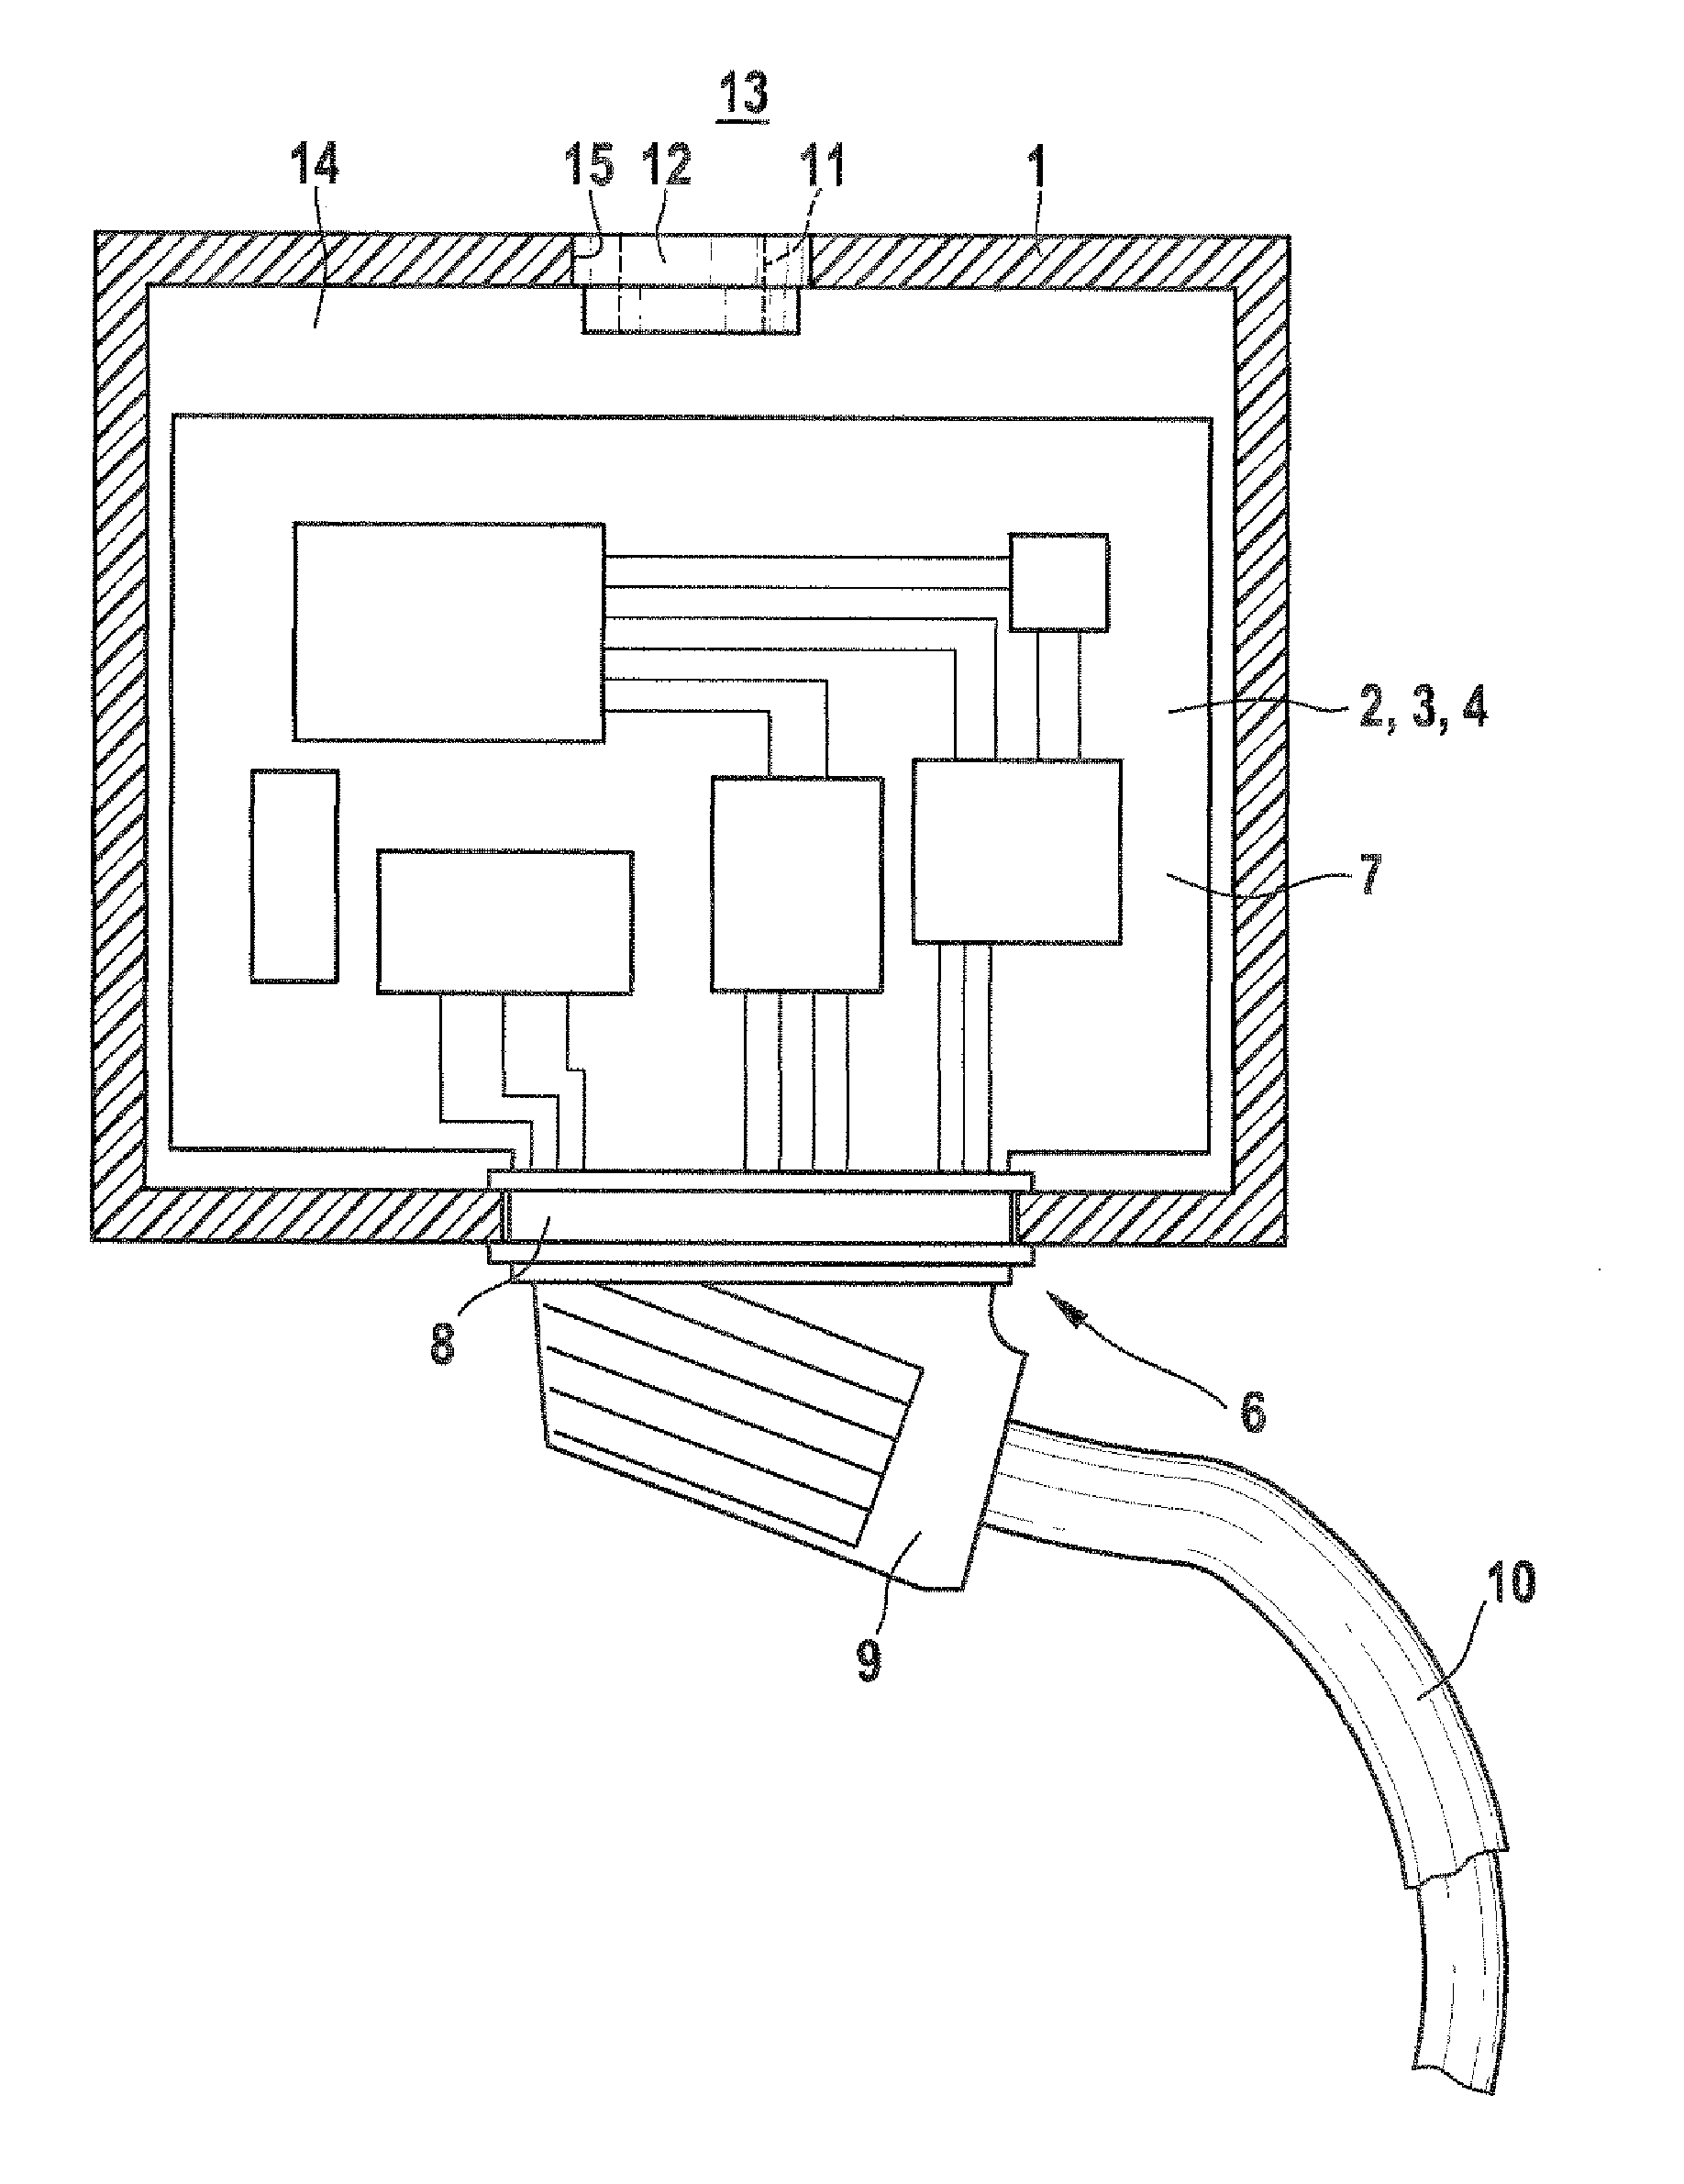 Pressure-relief valve of a housing for an electrical/electronic unit